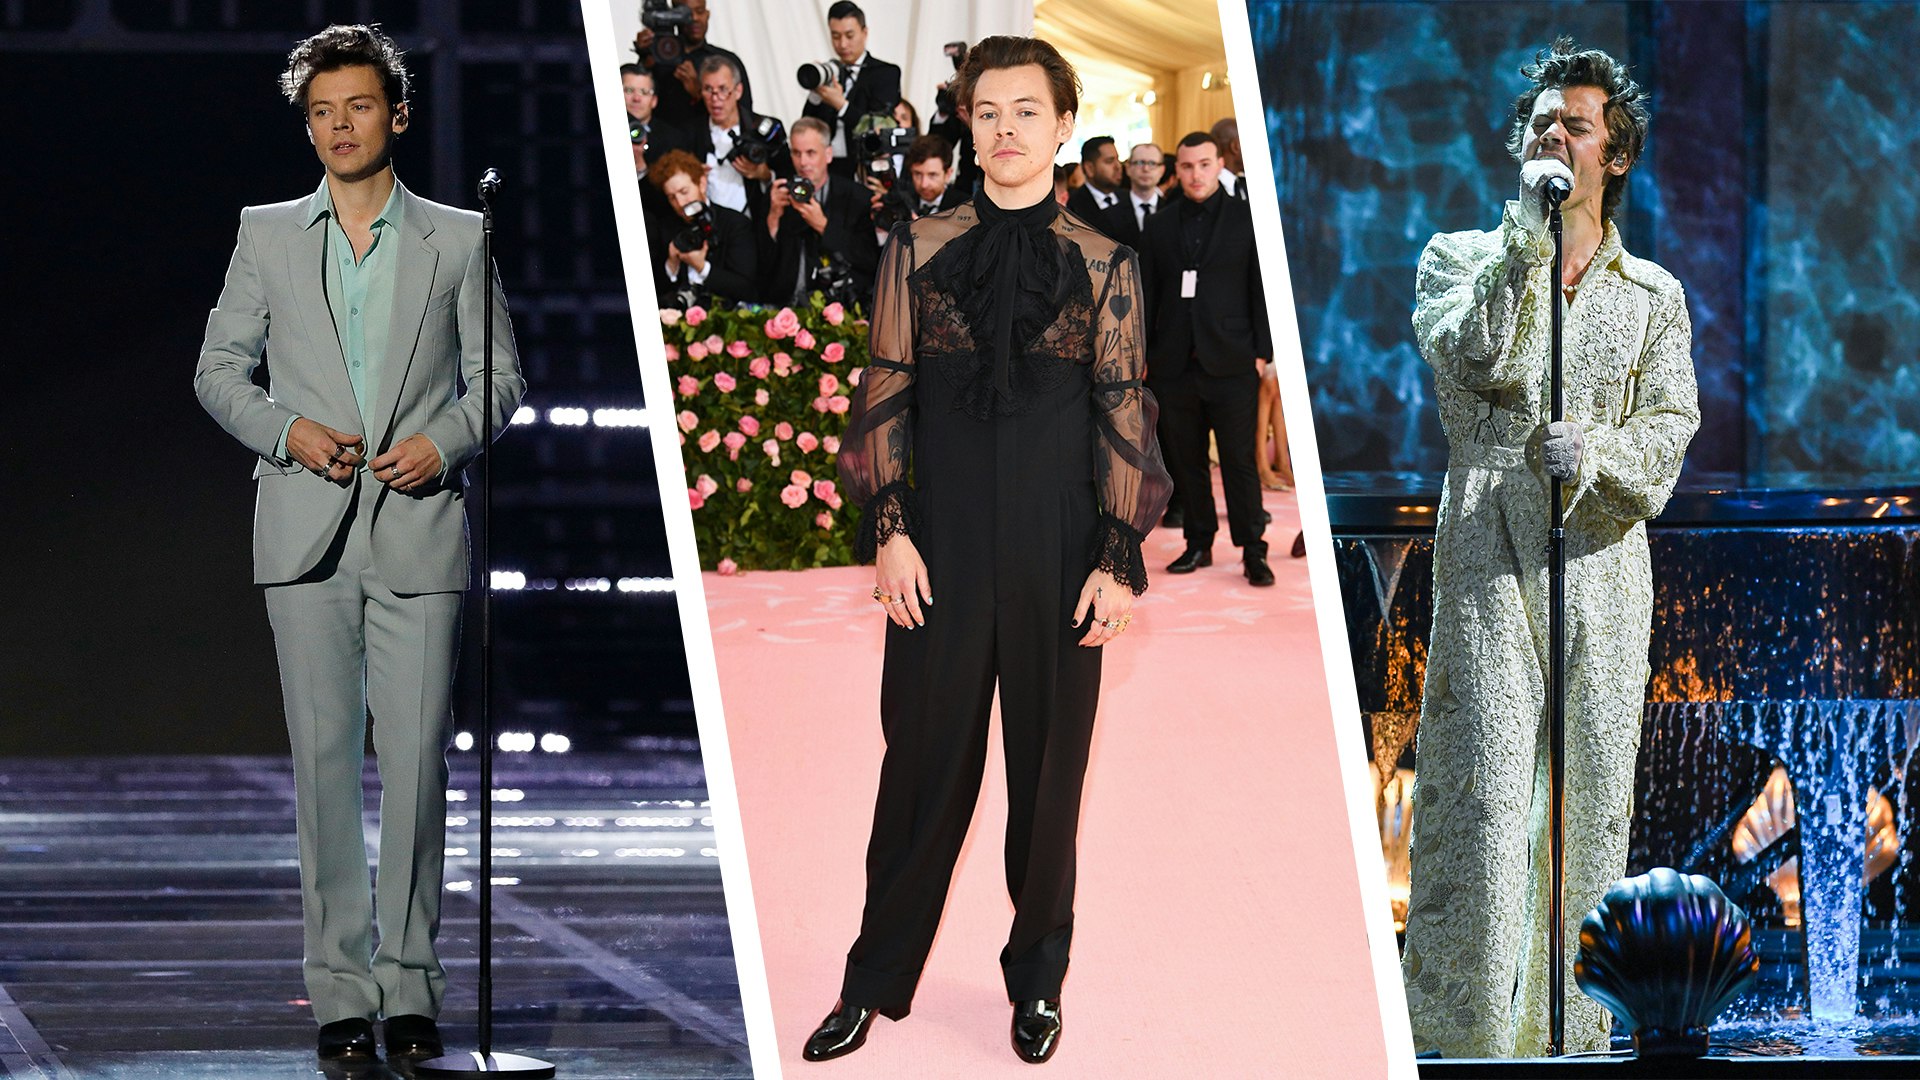 20 Best Harry Styles Outfits of All Time — Harry Styles' Most Iconic Looks